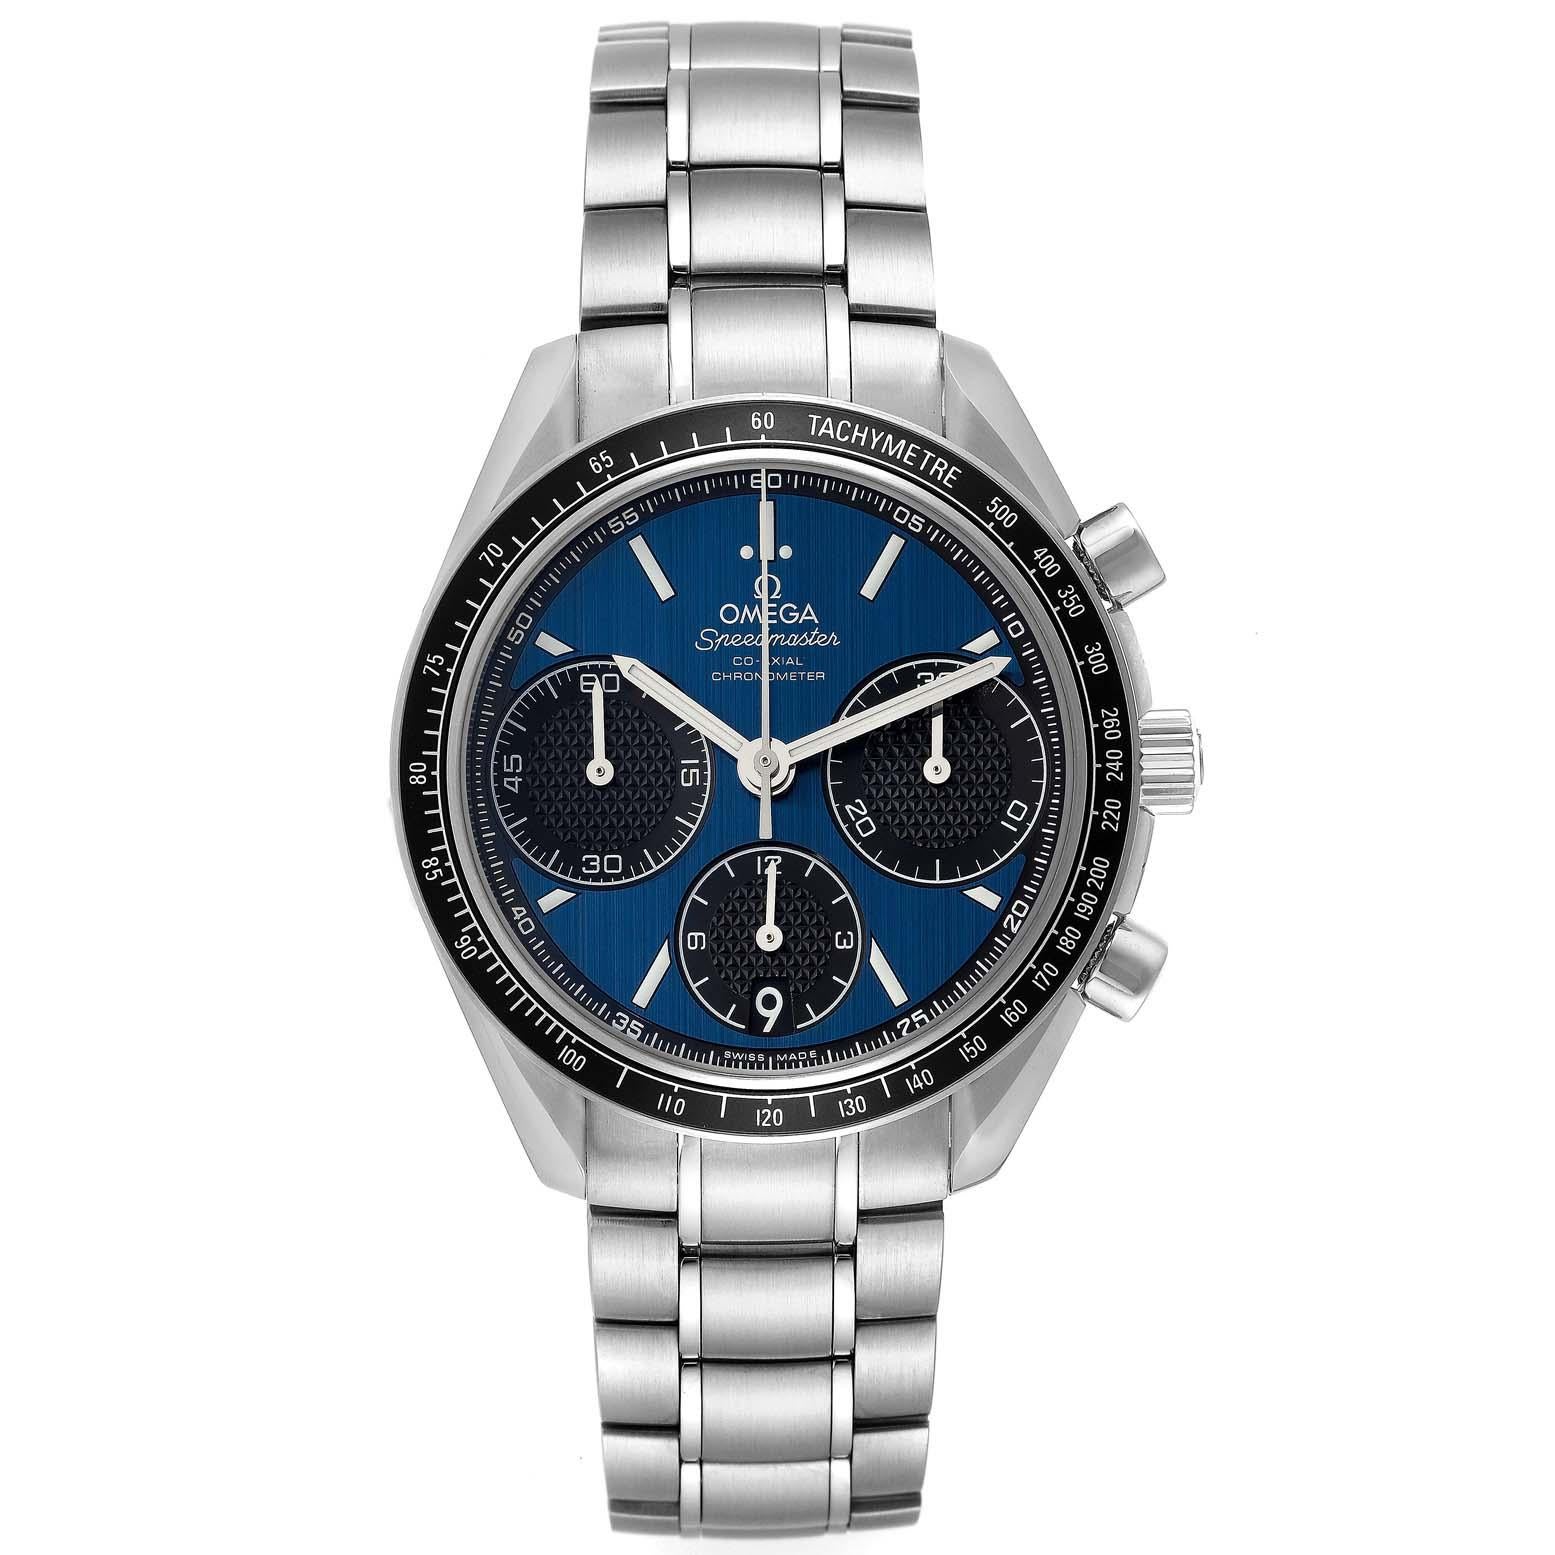 Omega Speedmaster Racing Blue Dial Steel Mens Watch 326.30.40.50.03.001. Automatic Self-winding chronograph movement with column-wheel mechanism and Co-Axial escapement. Free sprung-balance equipped with Si14 silicon balance spring. Officially